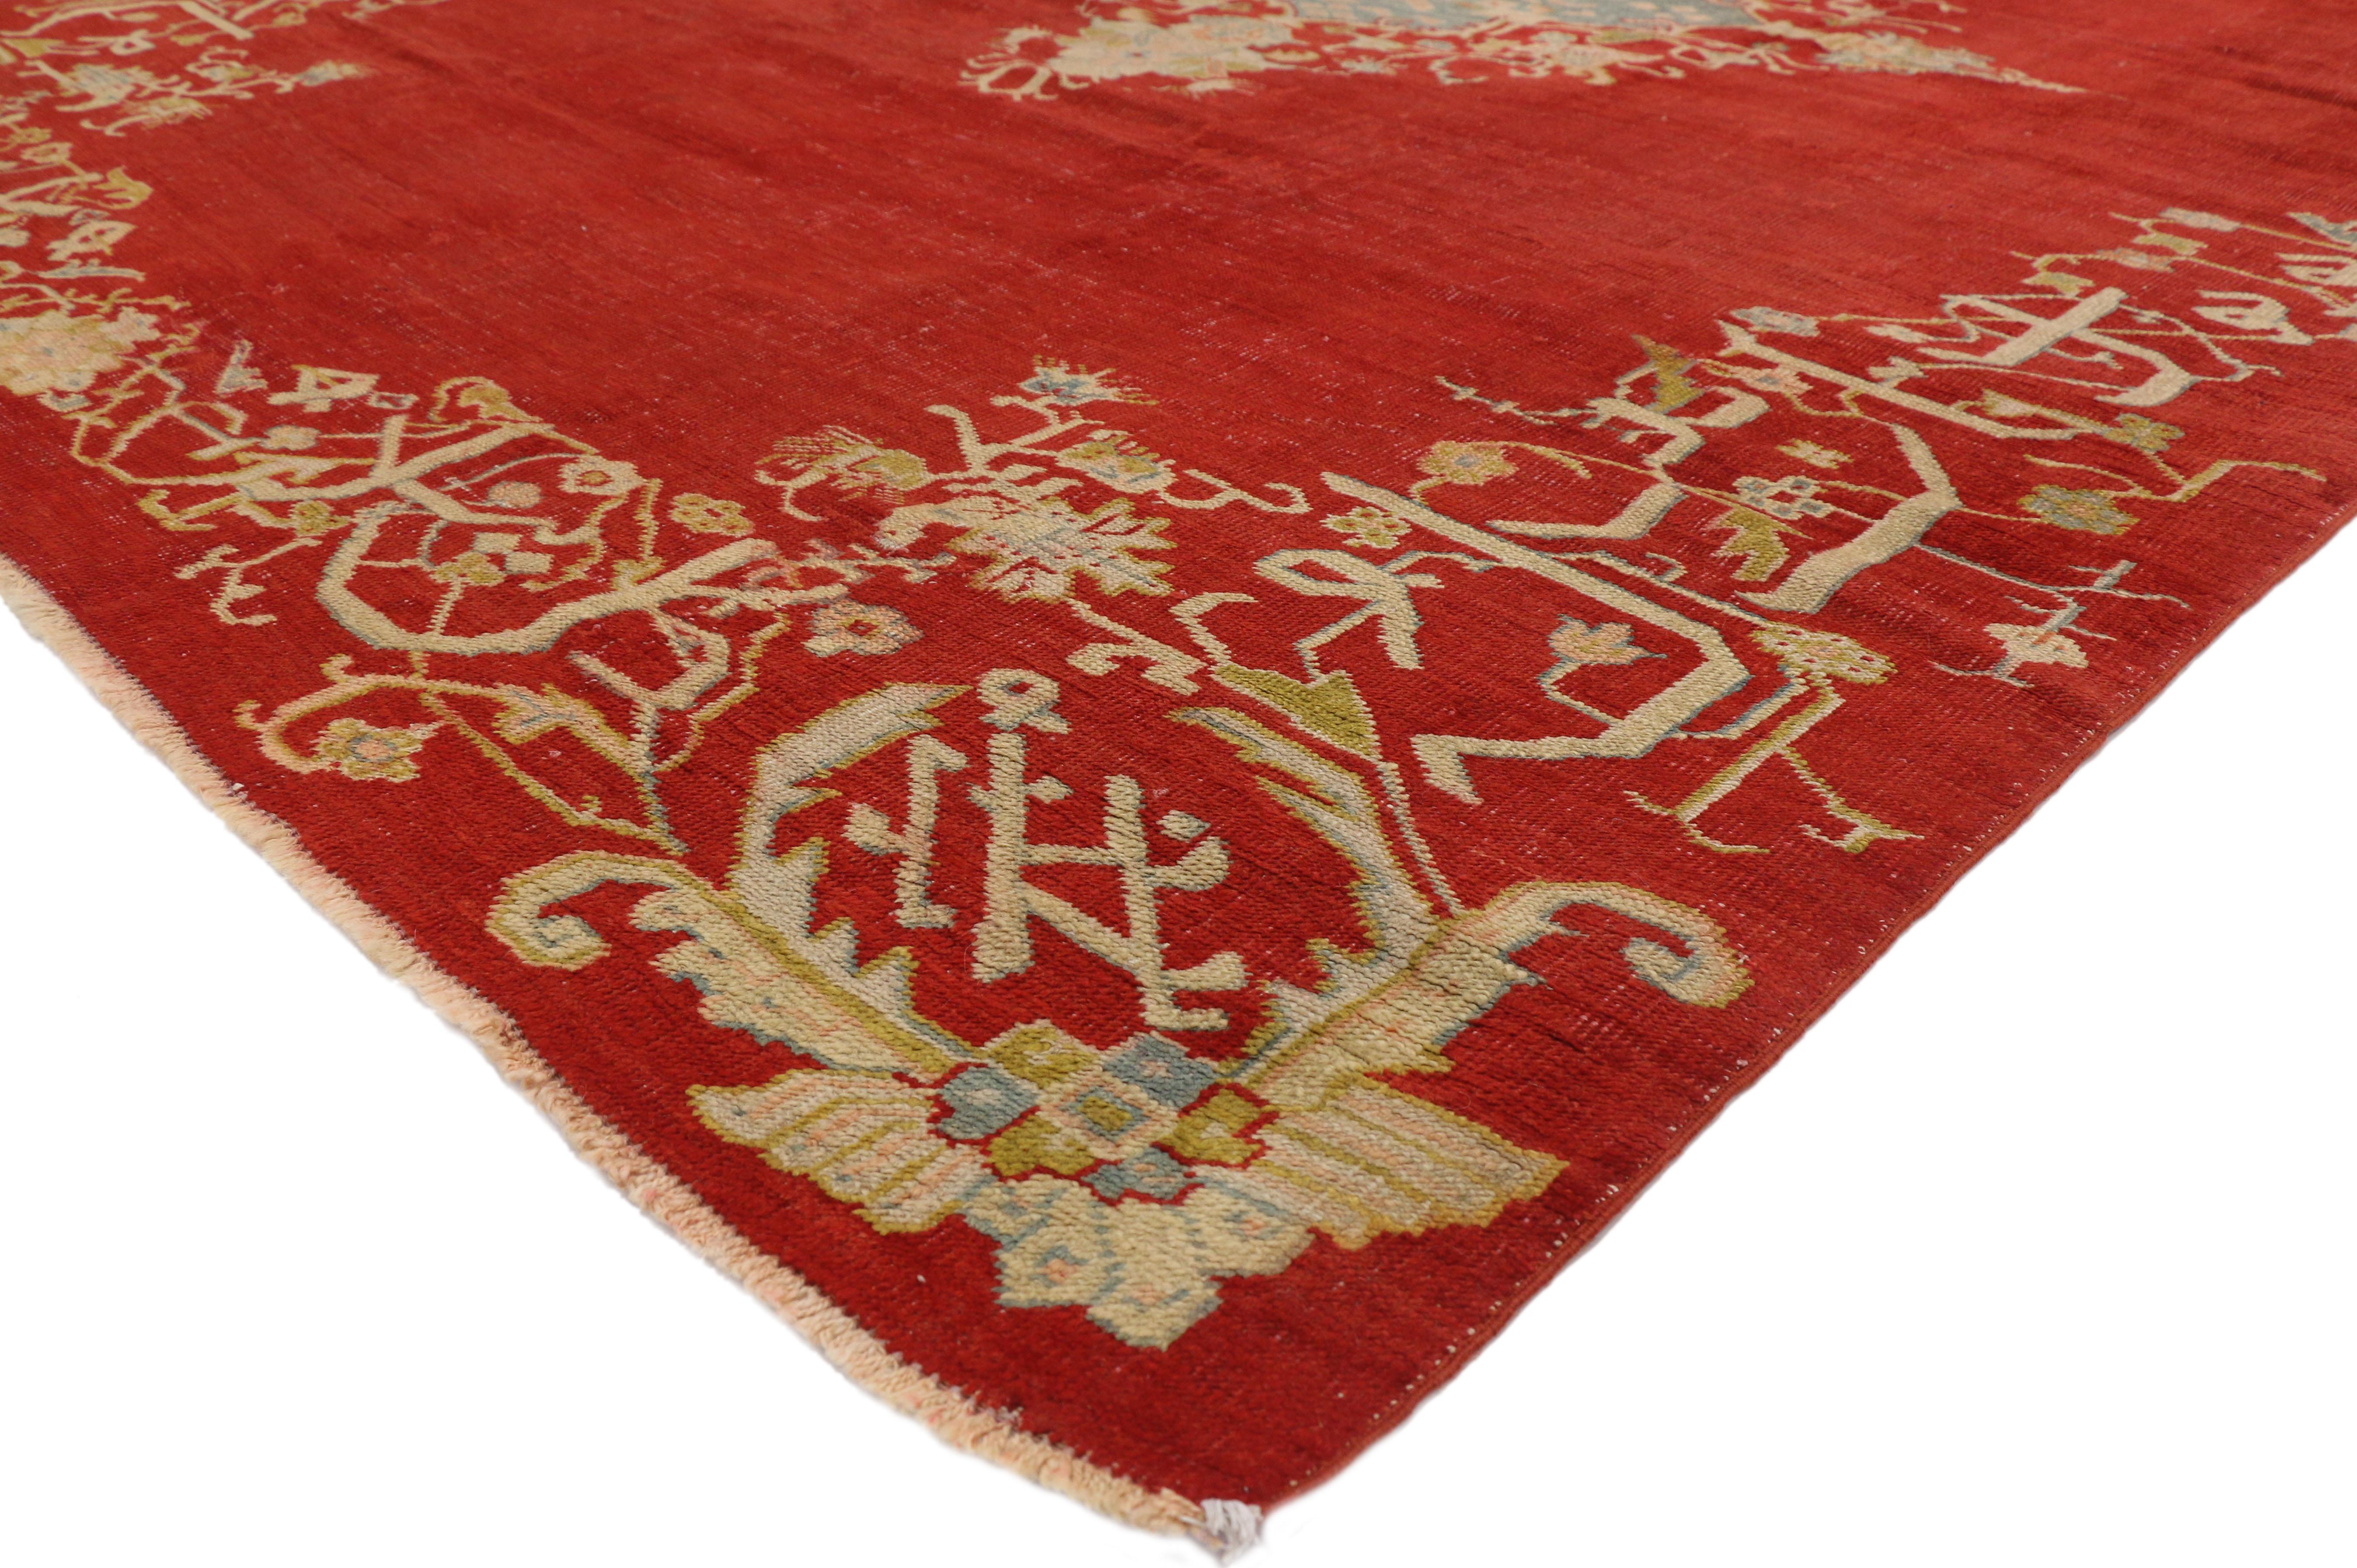 73422 Antique Turkish Oushak Rug with Jacobean Fretwork Style 08'05 x 11'10. Timeless Anatolian tradition meets Jacobean fretwork style in this Classic style hand-knotted wool antique Turkish Oushak rug. The open abrashed red field beautifully